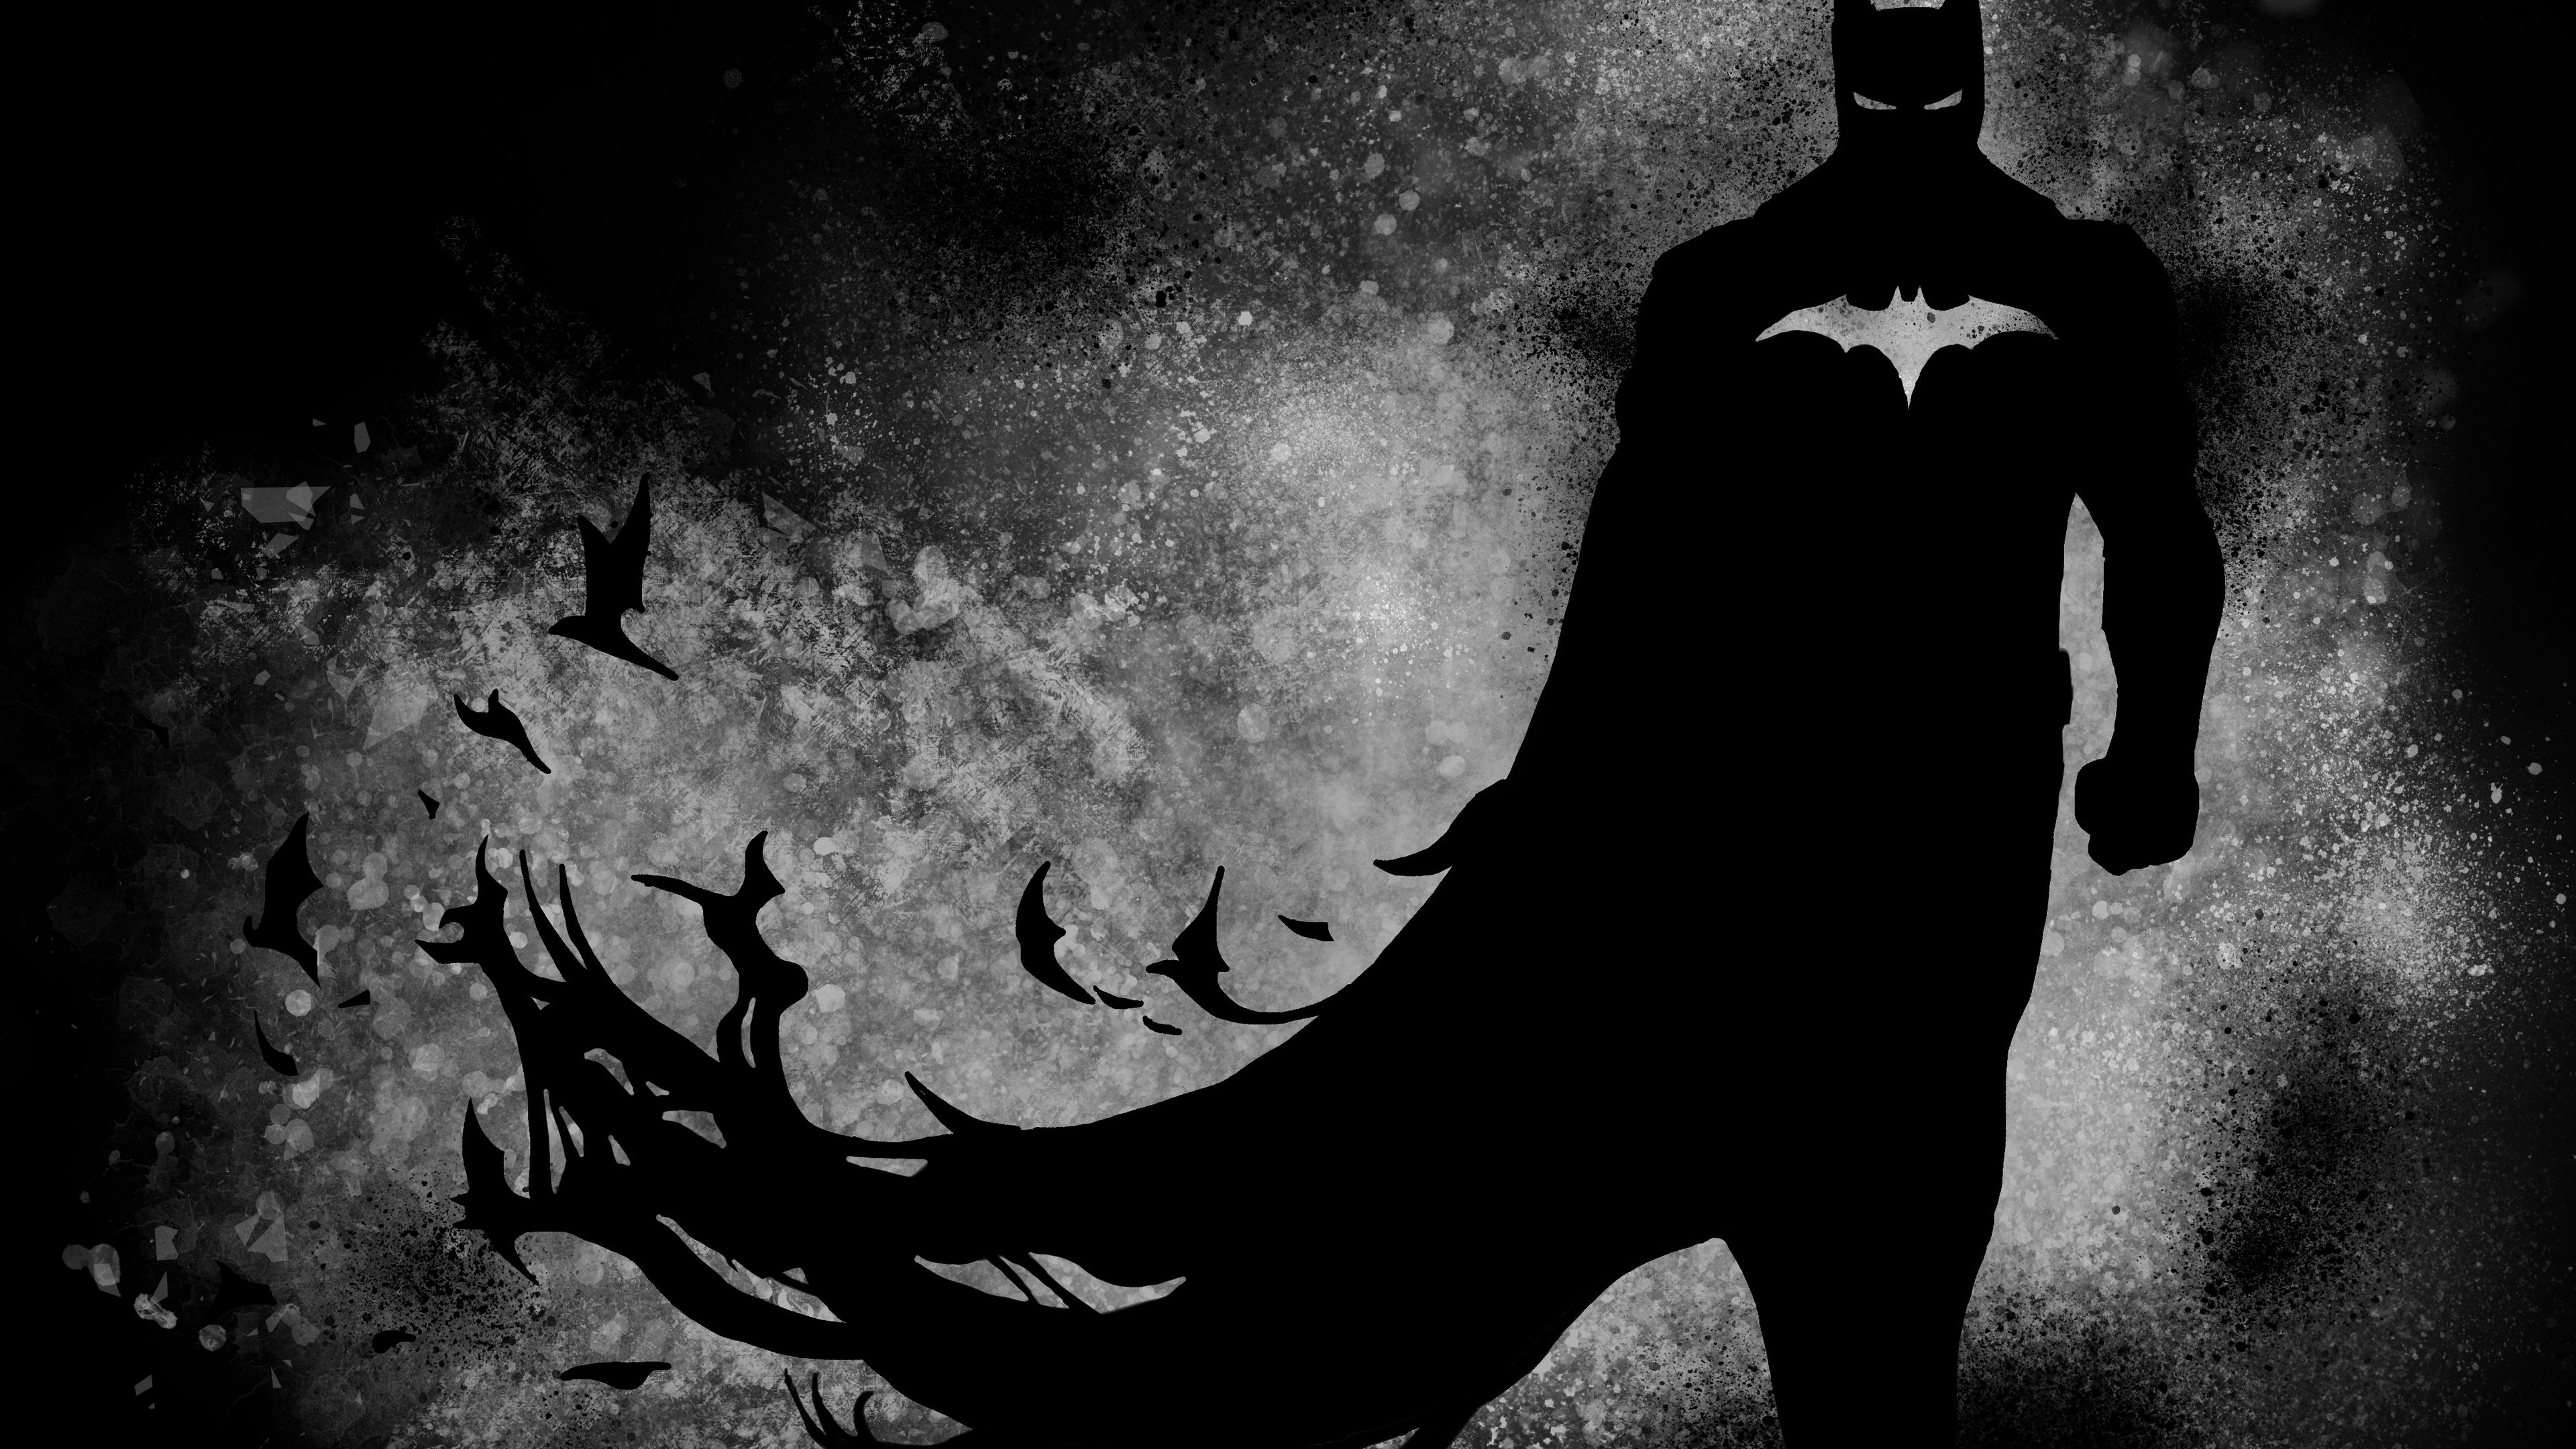 🔥 Free Download The Dark Knight Paint 4K Superheroes Wallpapers Hd